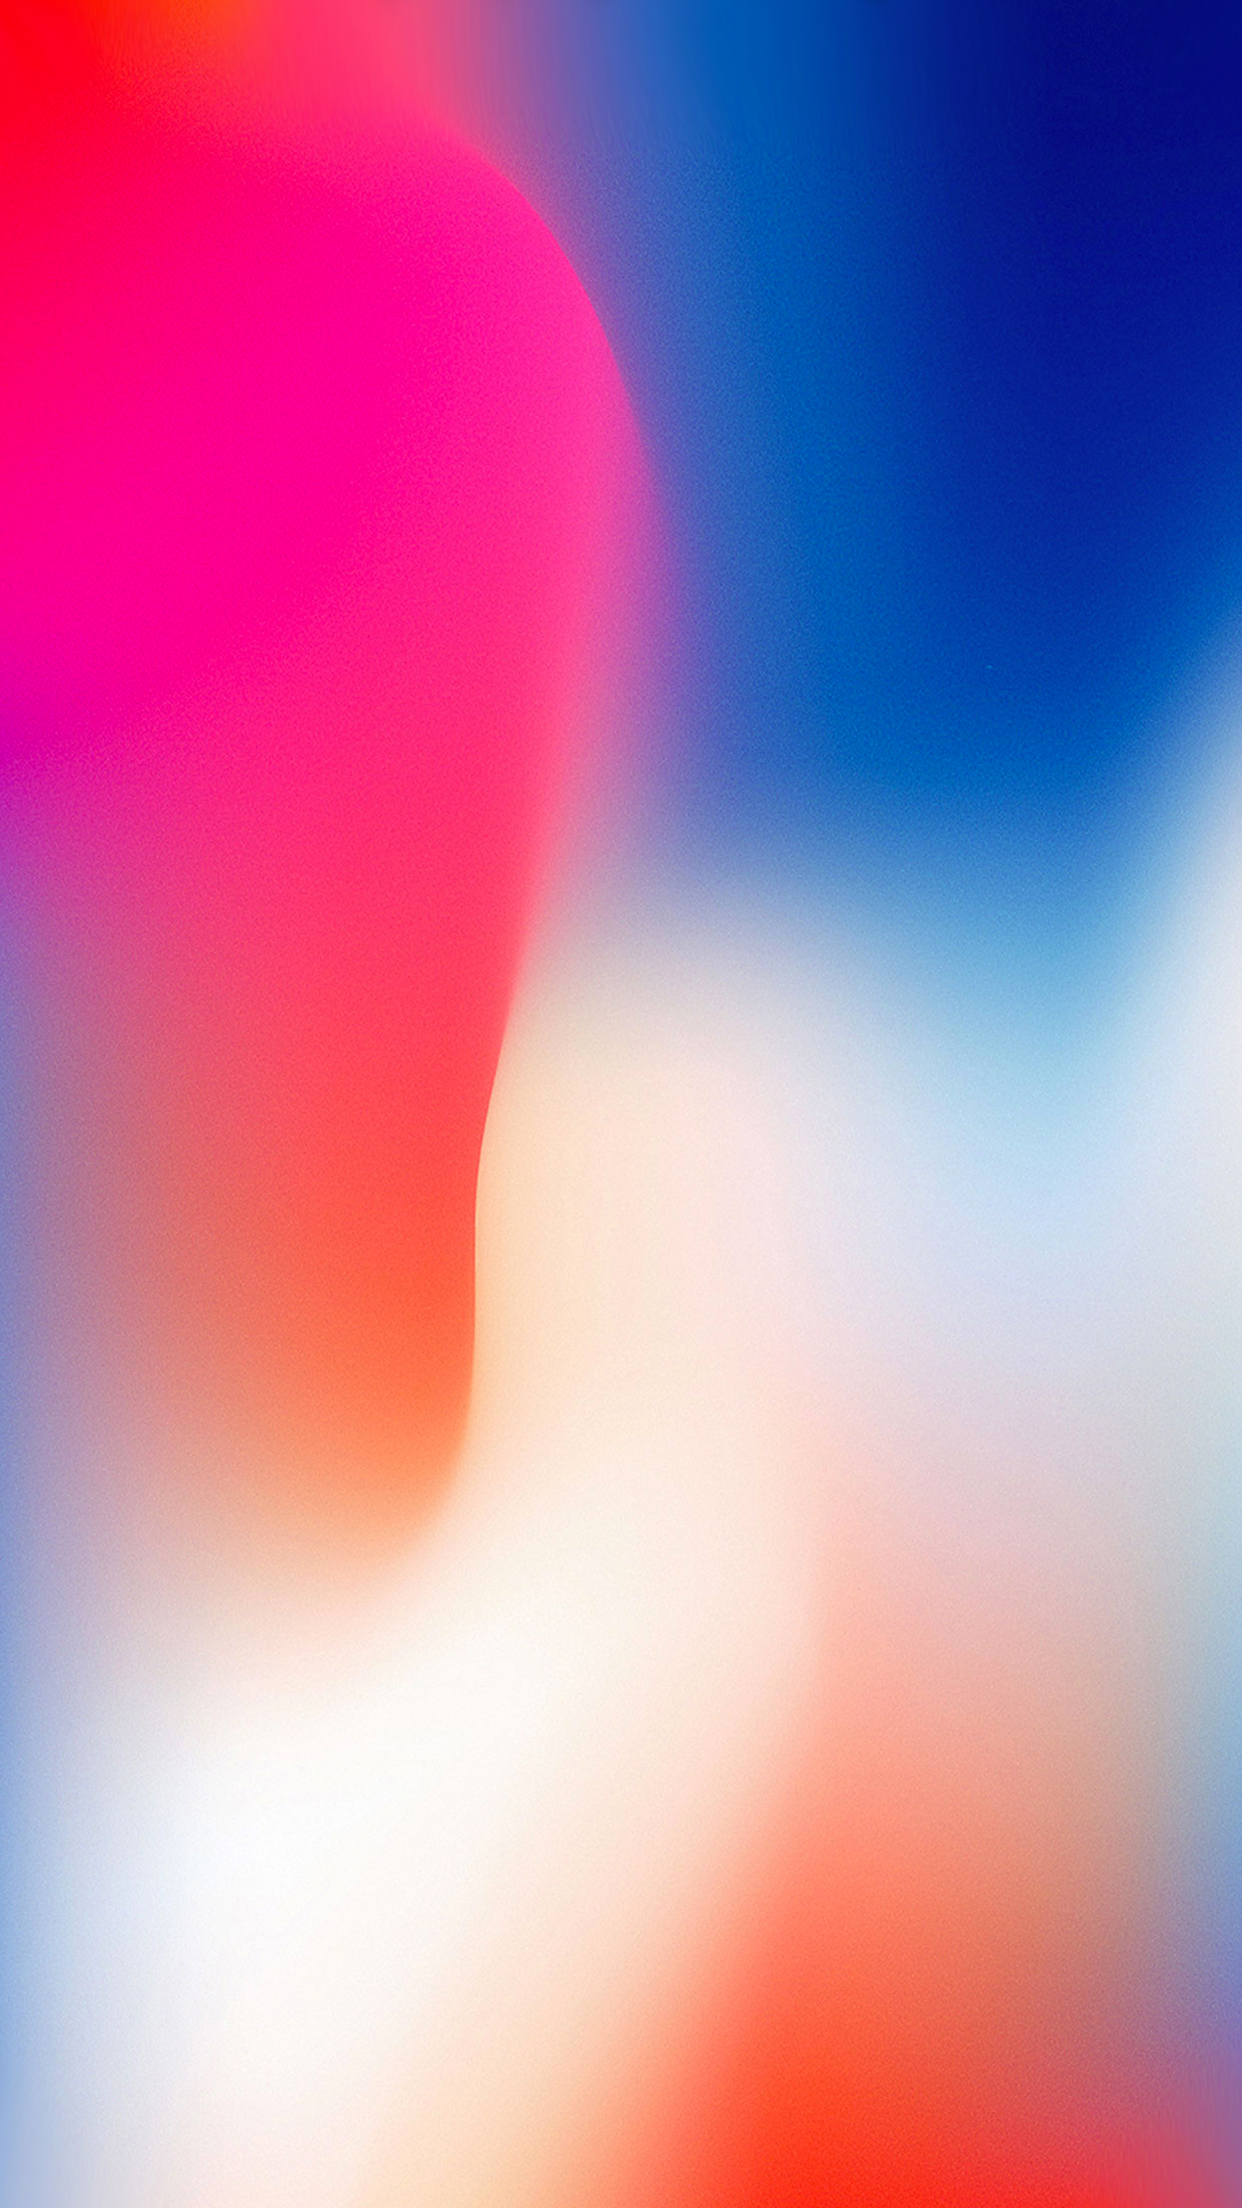 iPhone X Wallpaper for Download